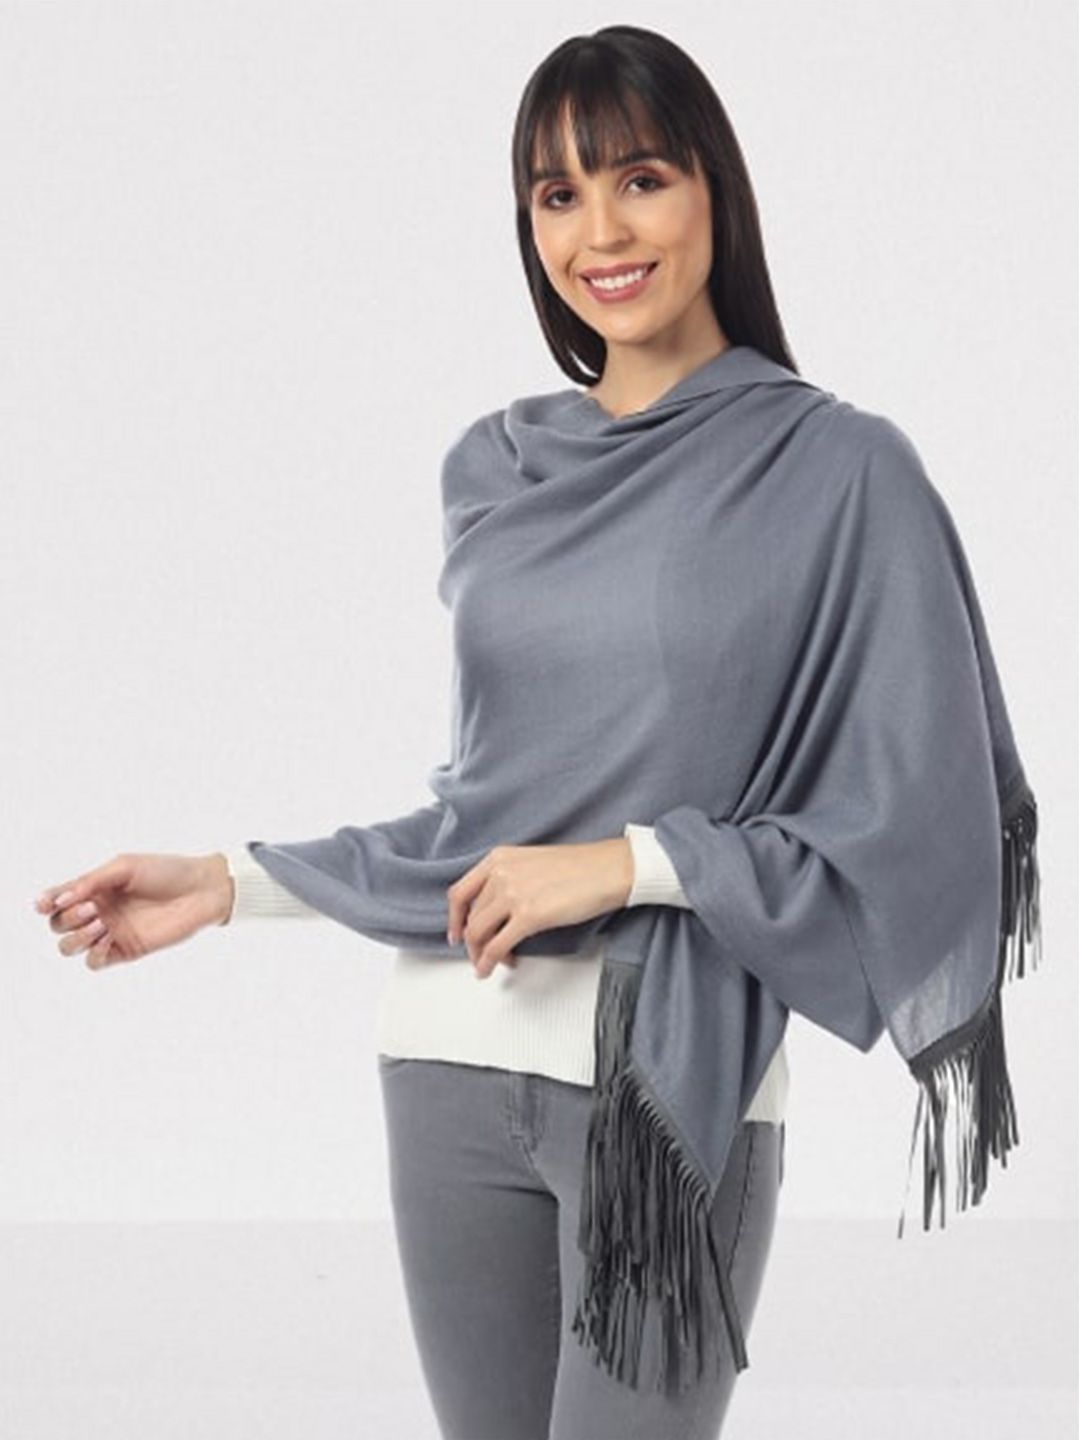 MUFFLY Women Grey Stole Price in India